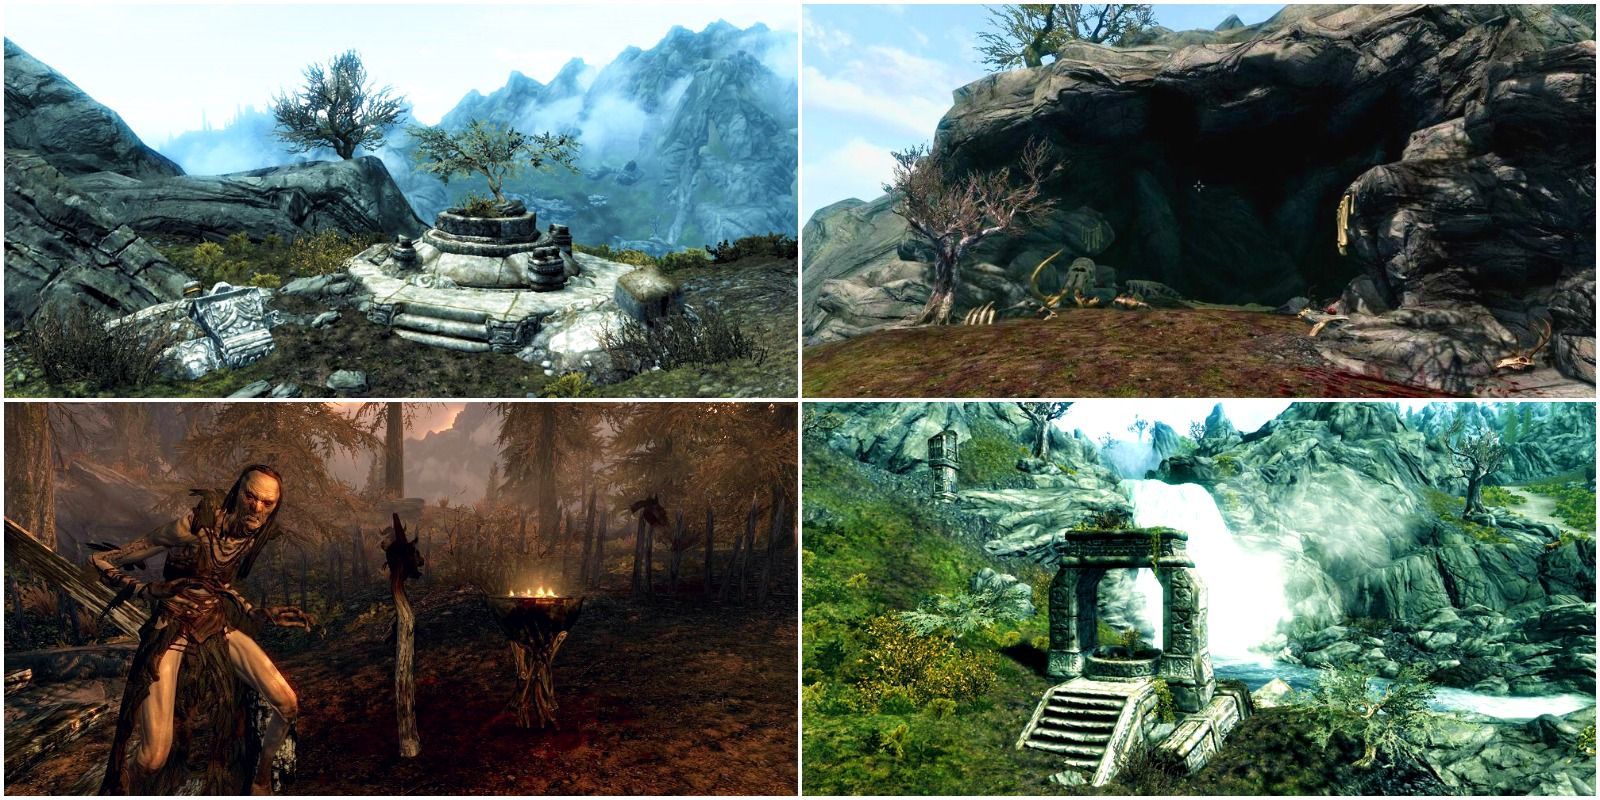 top left: stone altar with juniper planet. top right: troll cave. bottom right: stone altar by waterfall. bottom left: hagraven nest